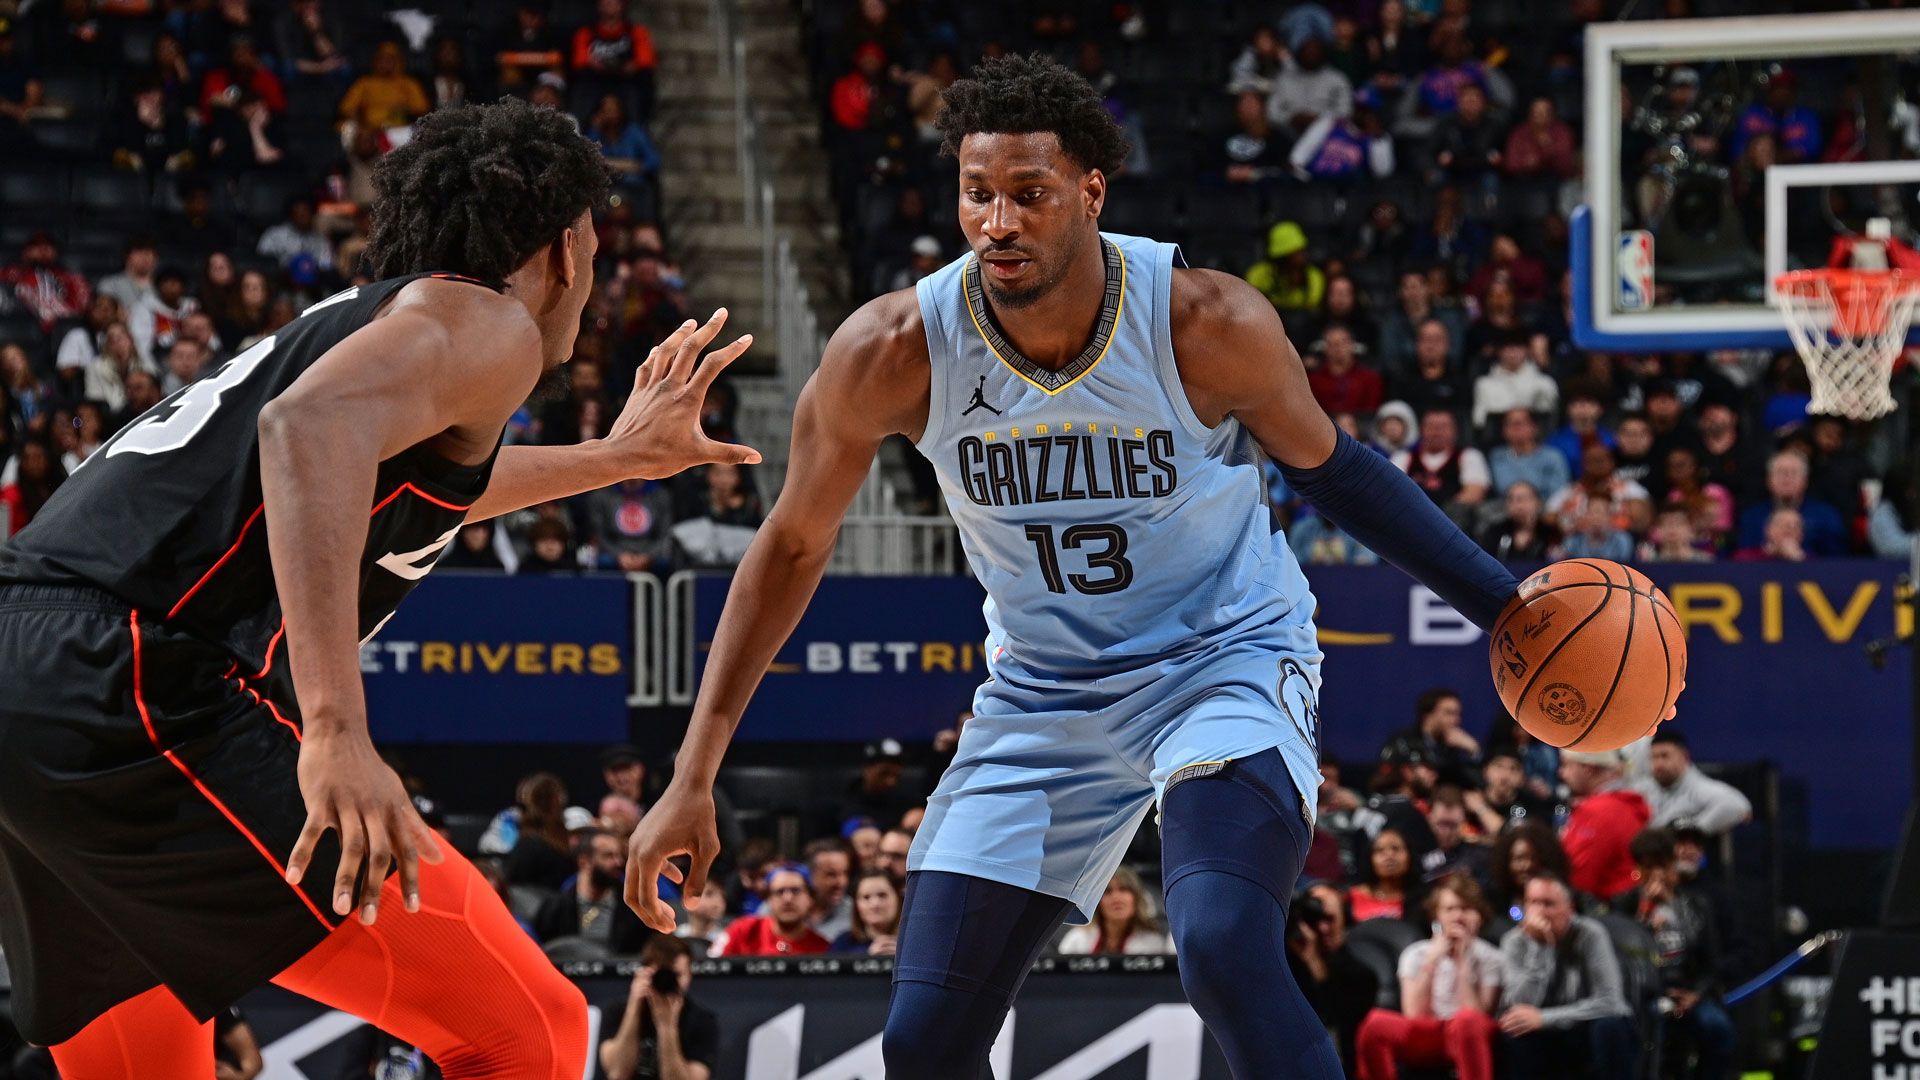 MikeCheck: Jackson grinds to 65-game milestone for Grizzlies; qualifies for NBA season honors